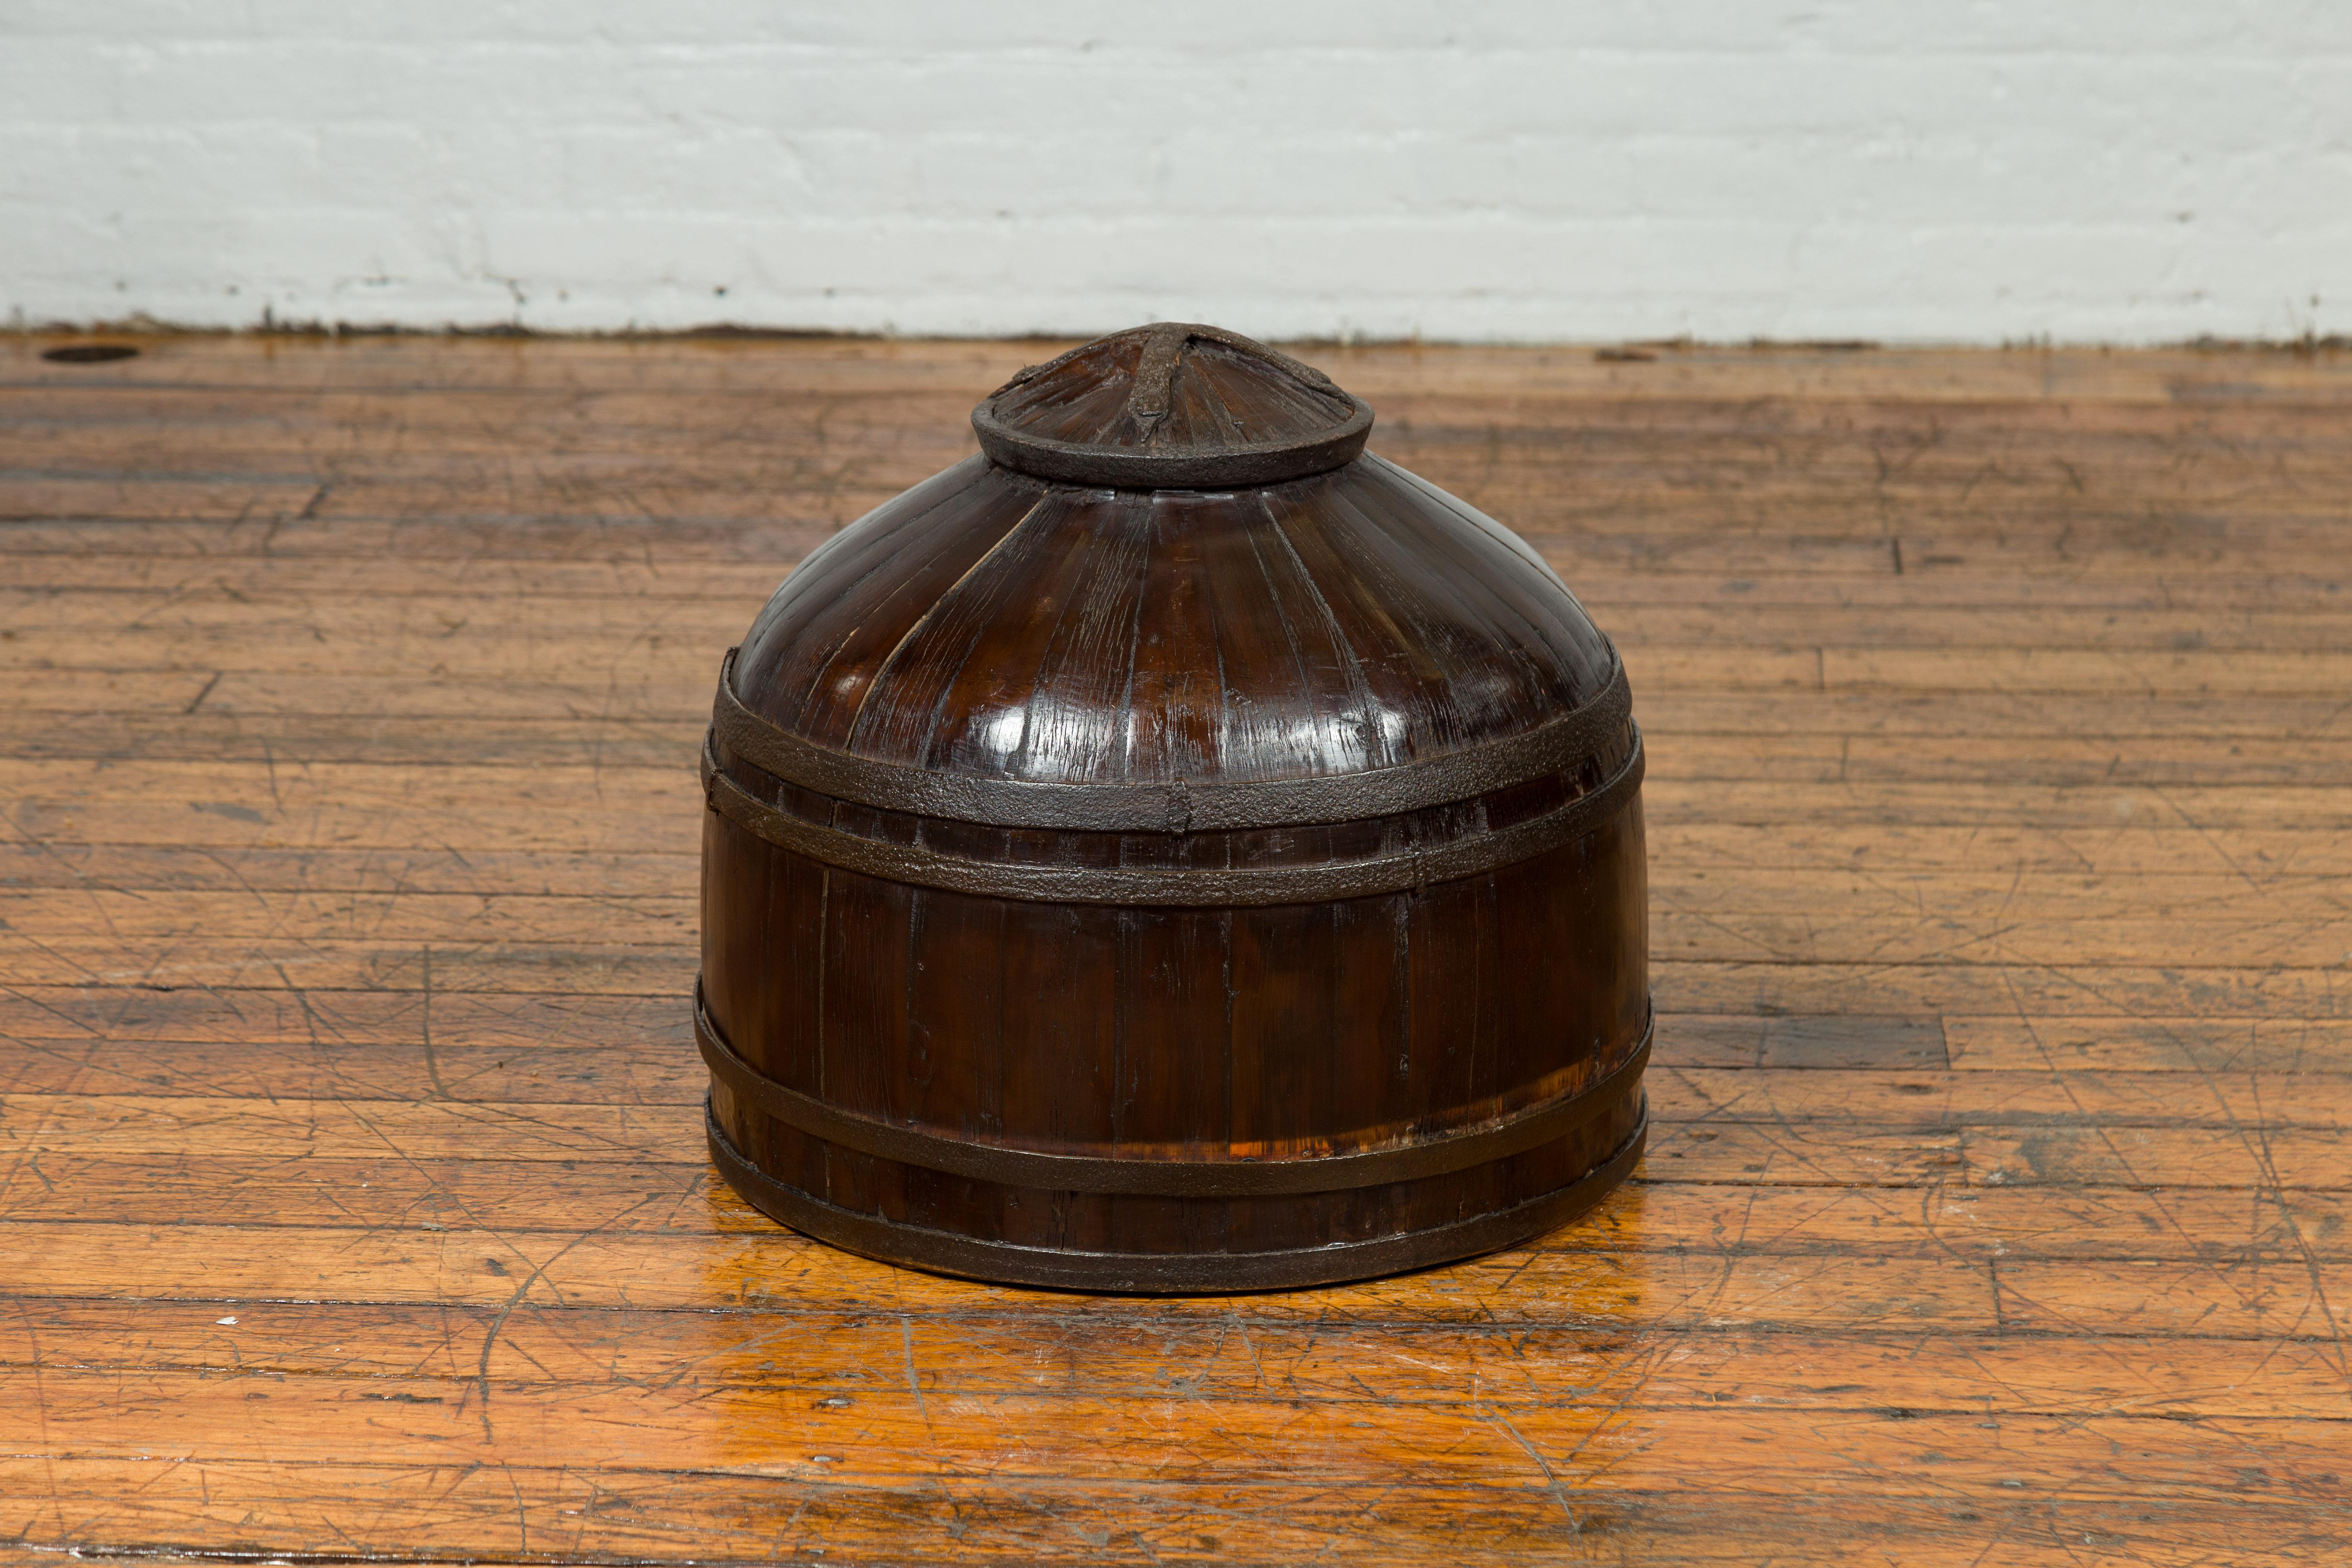 A Chinese antique decorative wooden cover from the 19th century. Charming us with its unusual shape and dark patina, this wooden cover which used to be part of a farmer's box, will make for an exquisite decorative accent in any home. Its conic shape